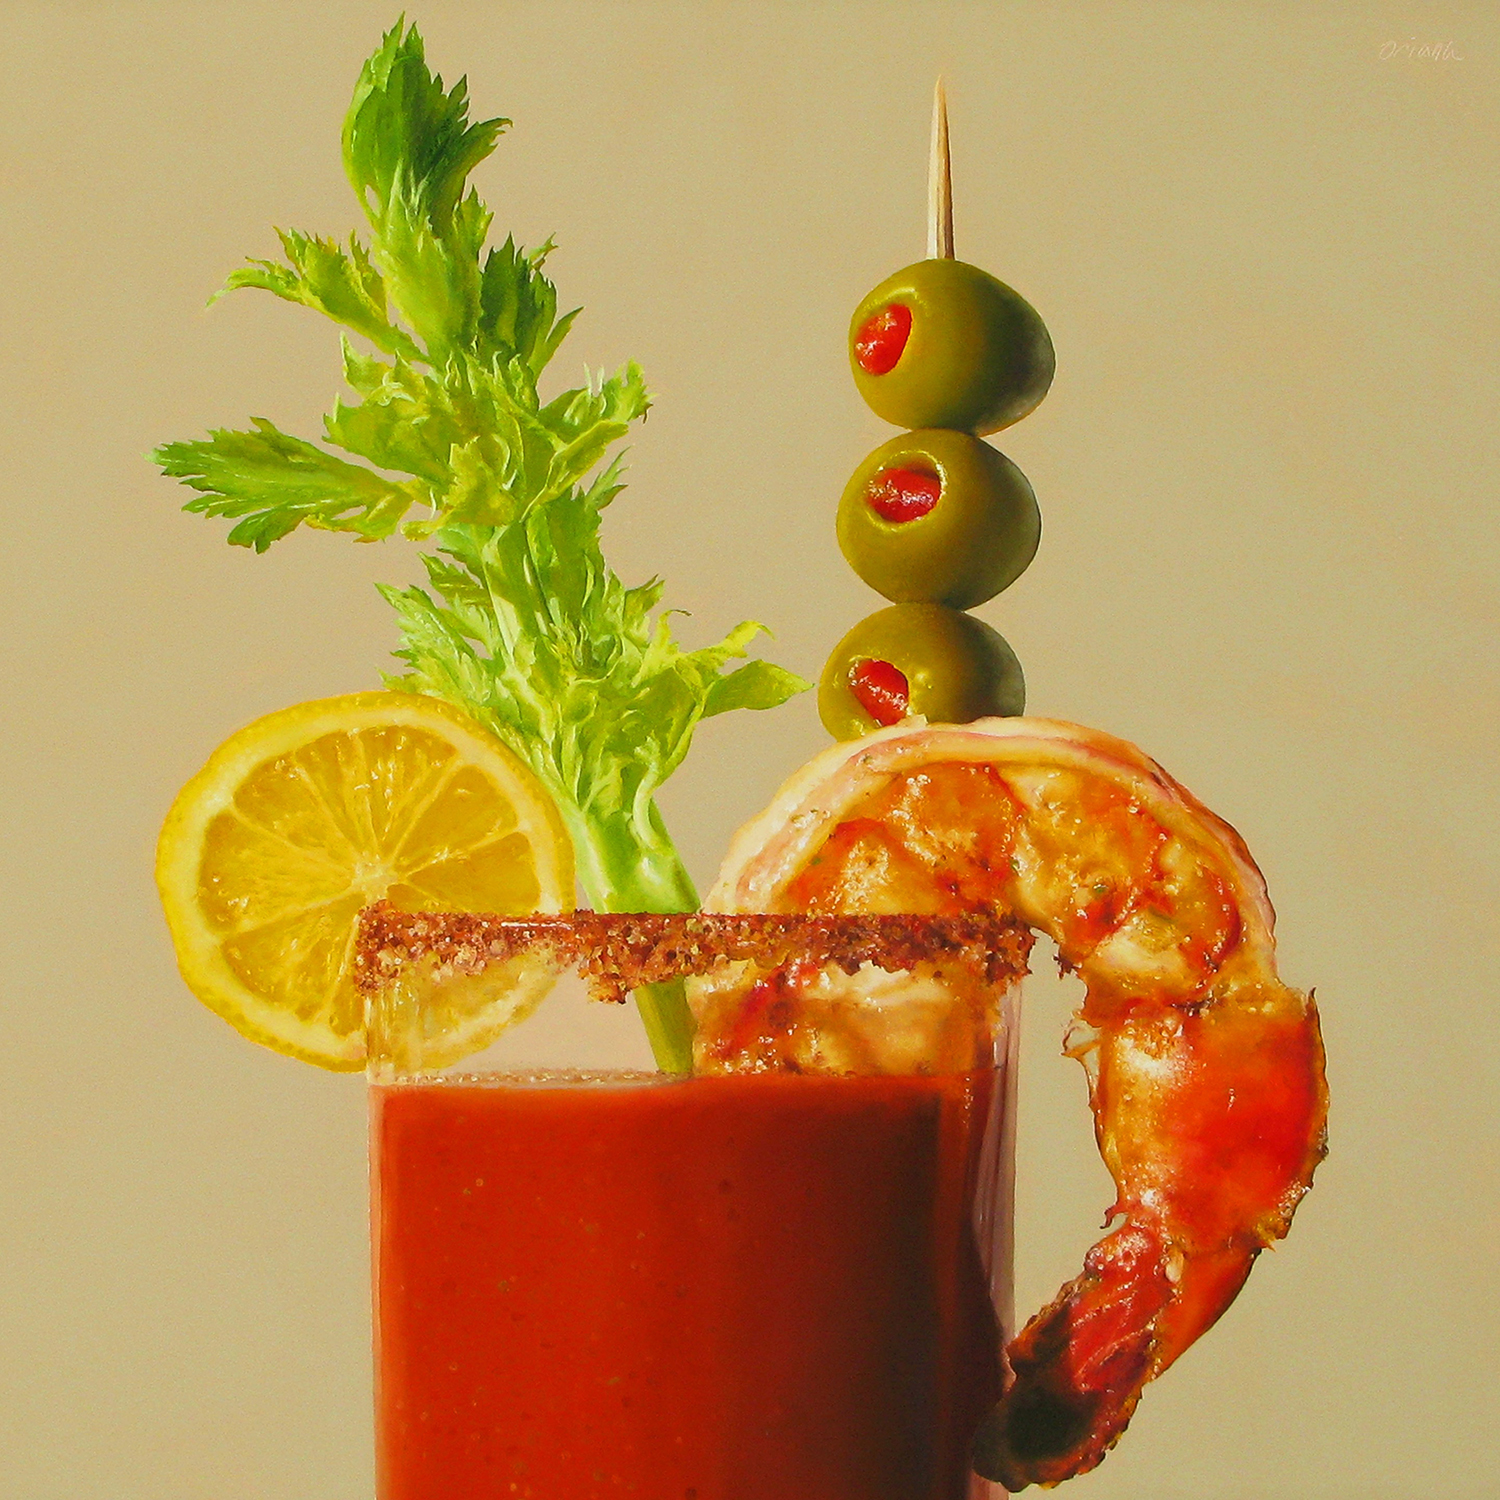  Bloody Mary  oil on panel / 16 x 16 inches  SOLD 